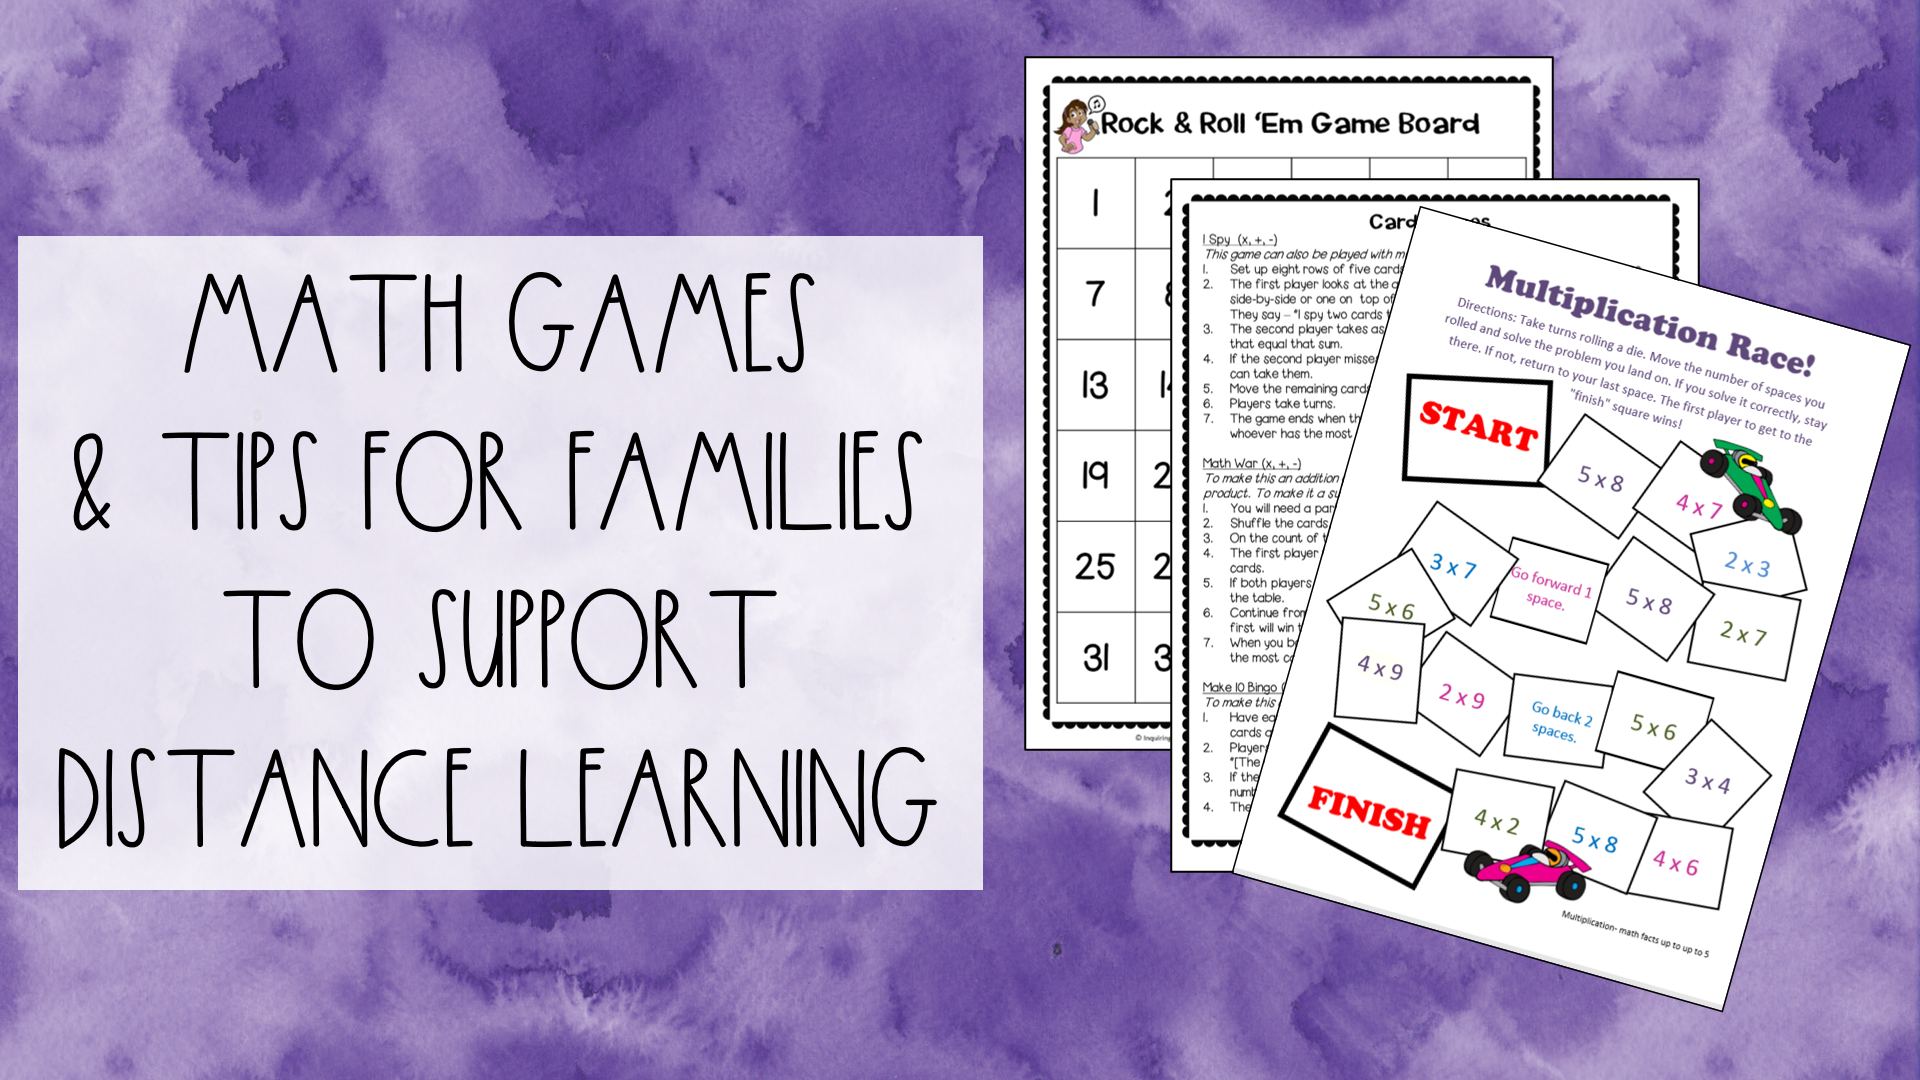 Text on the left reads "Math Games & Tips for Families to Support Distance Learning". On the right, images of the math games are featured.